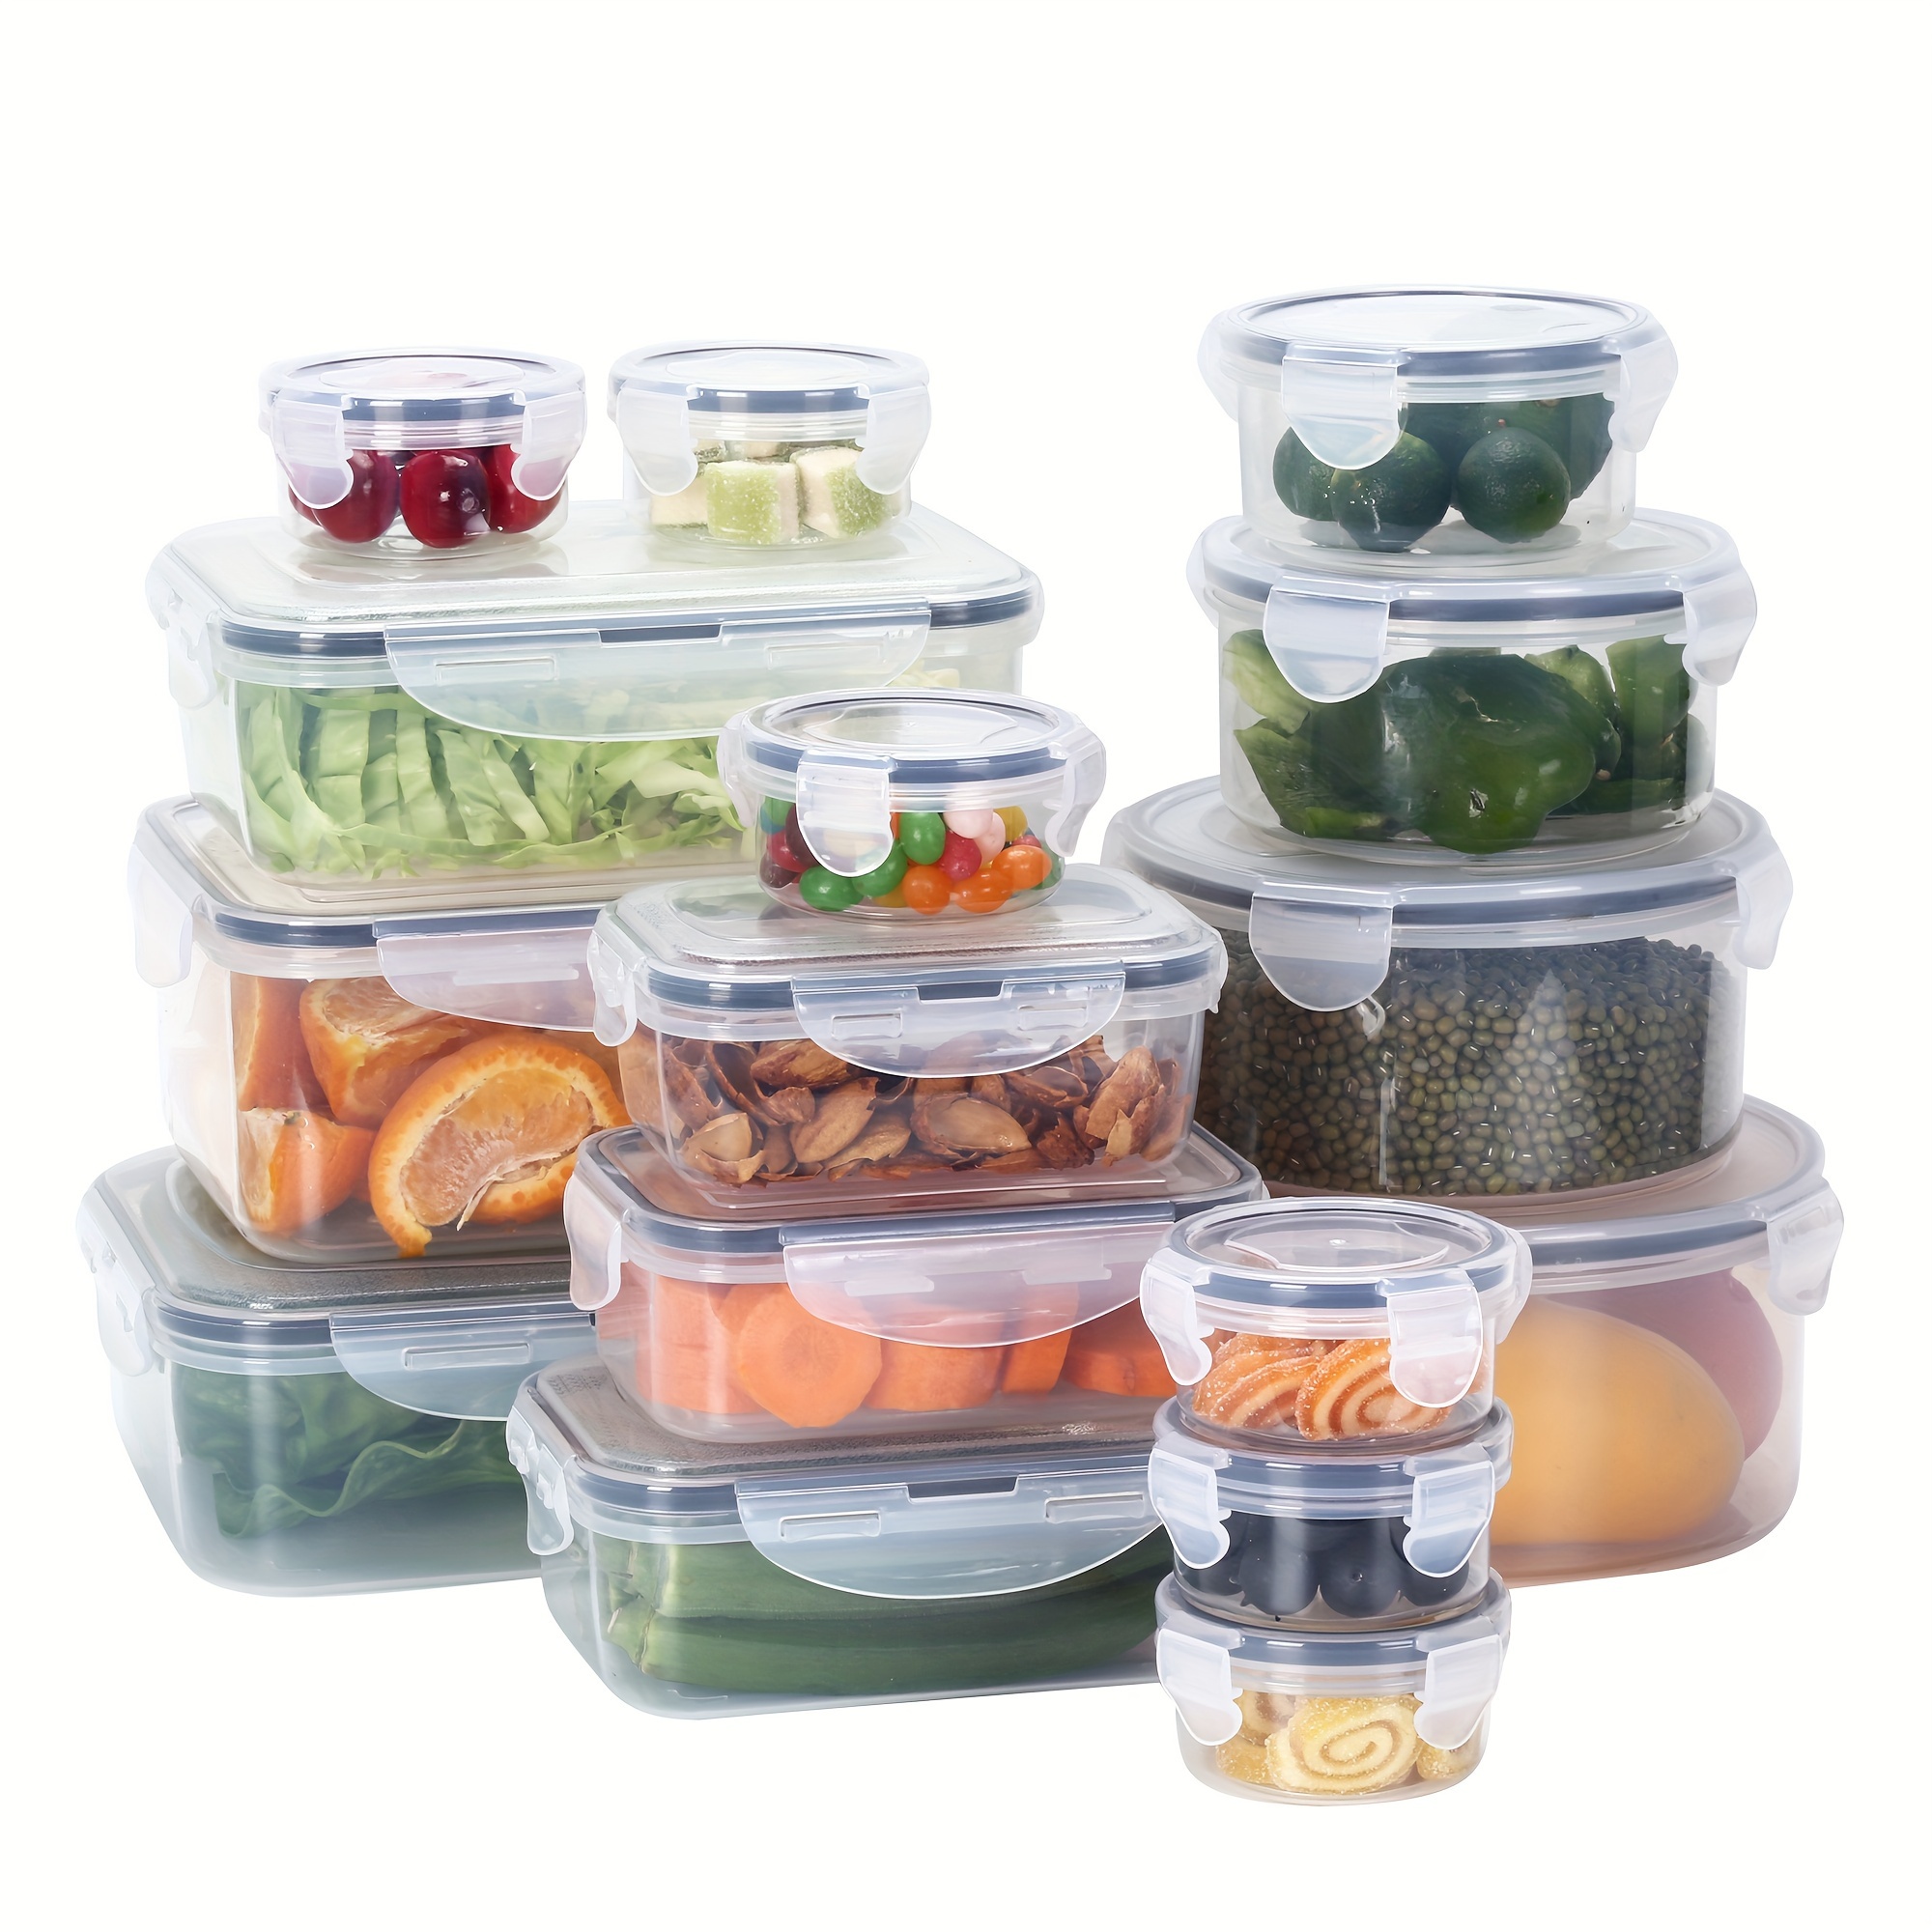 16pcs Storage Container, Multifunctional Leak Proof And Reusable Food Storage Box With Lid, Portable And Durable Clear Food Fresh-keeping Box, For Egg